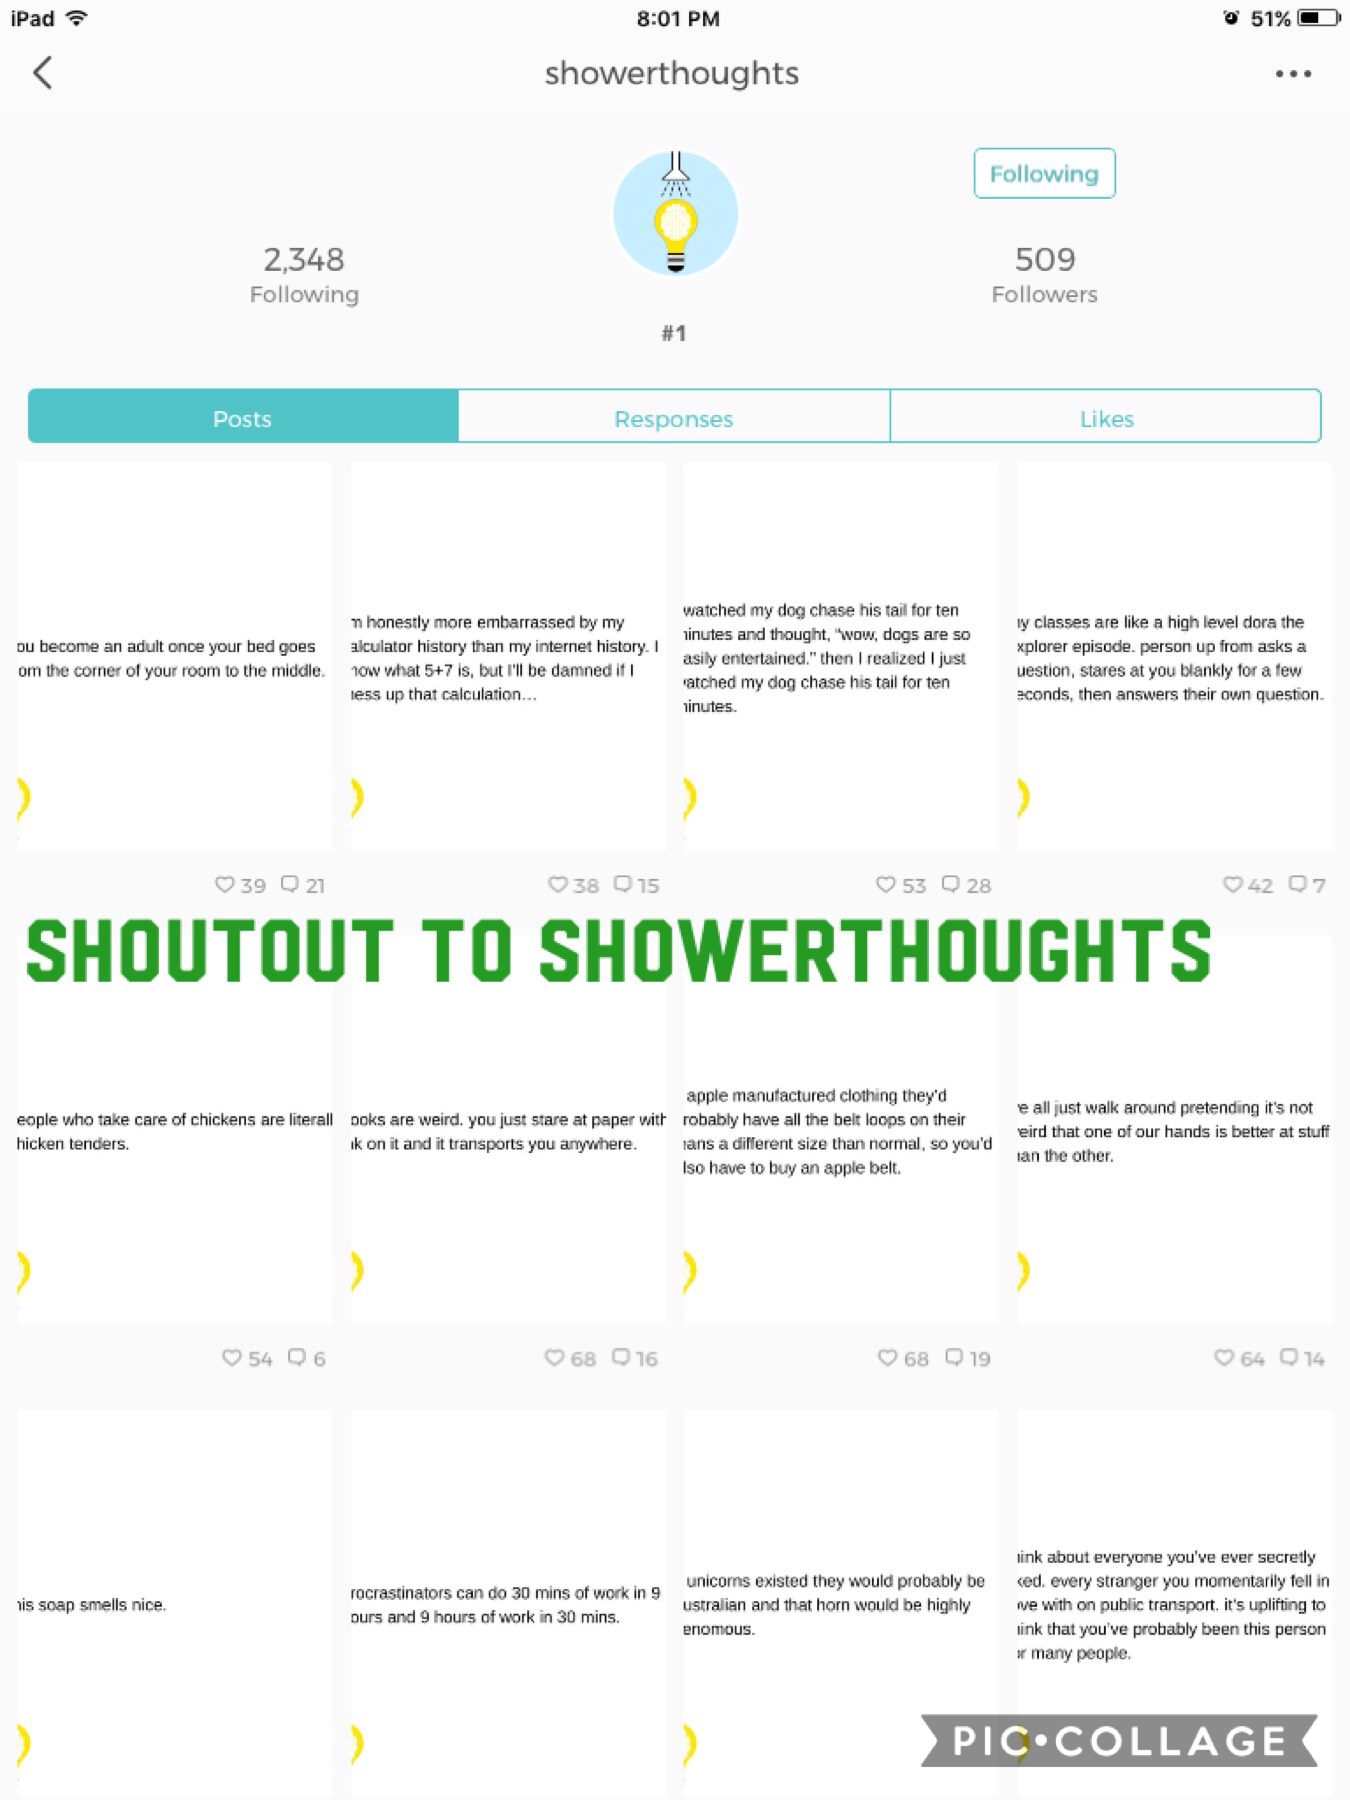 Take a look at showerthoughts!



Sorry I was off of PicCollage for a while, but I'm back now!!!!